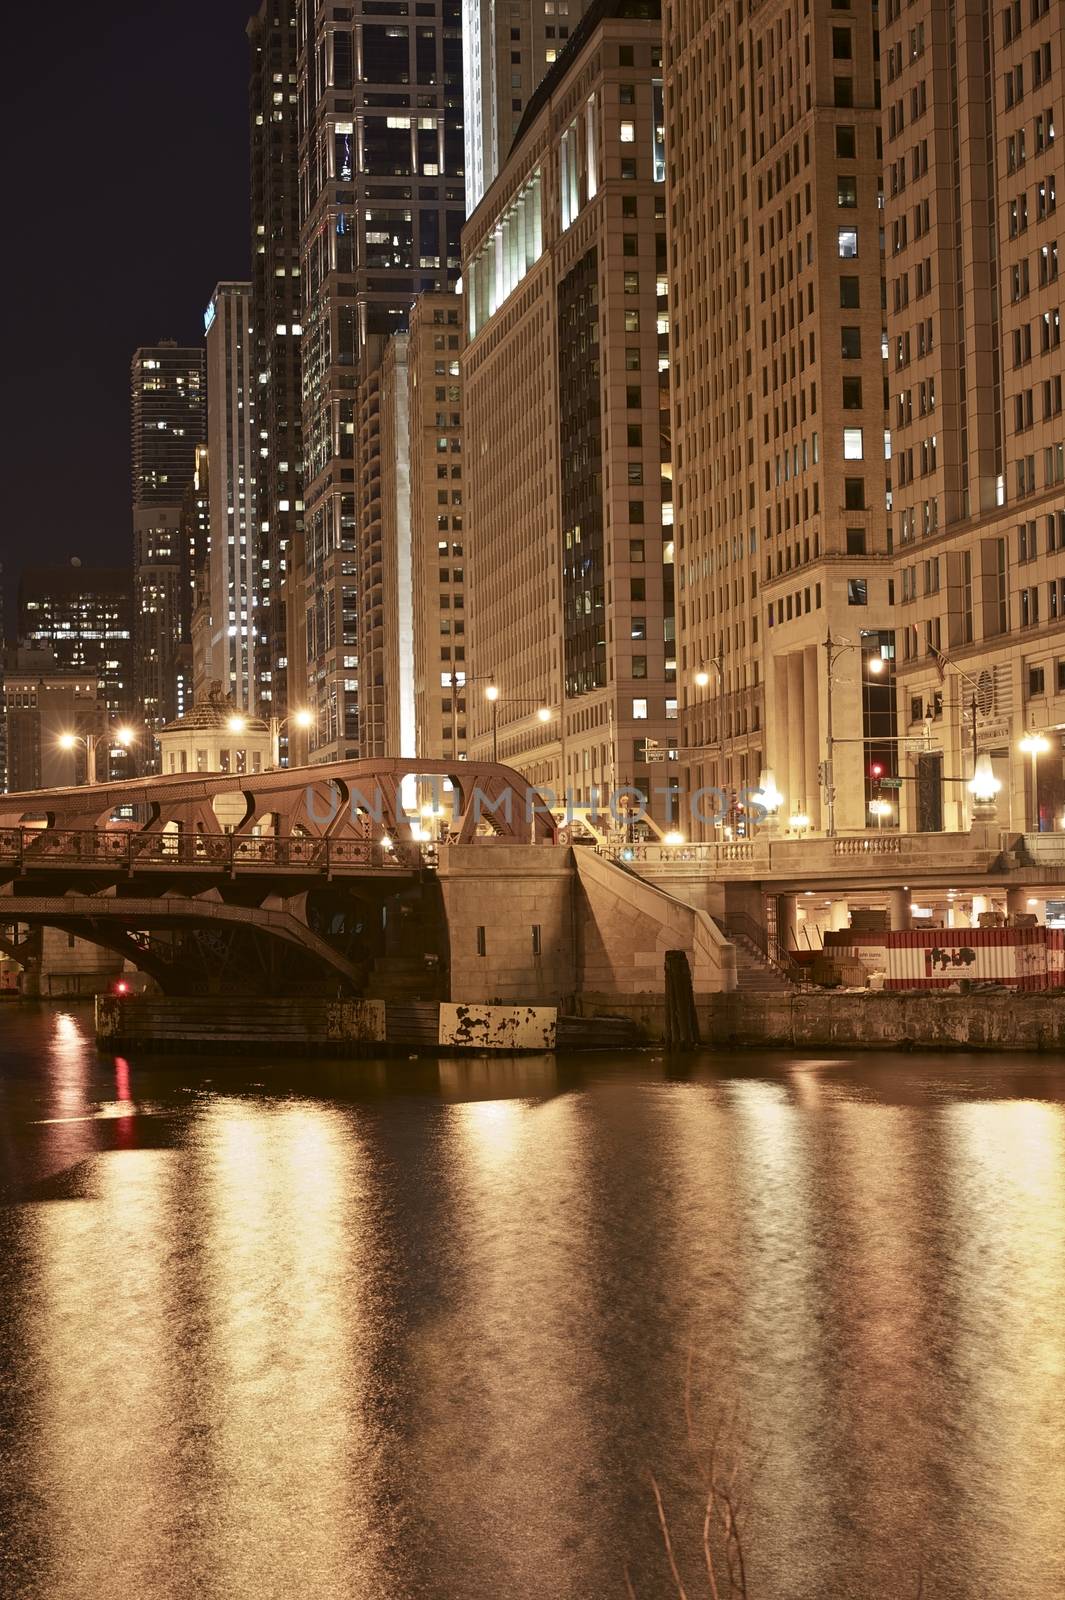 Chicago Golden Night - Wacker Drive and Chicago River. Chicago Downtown at Night. Vertical Photography.